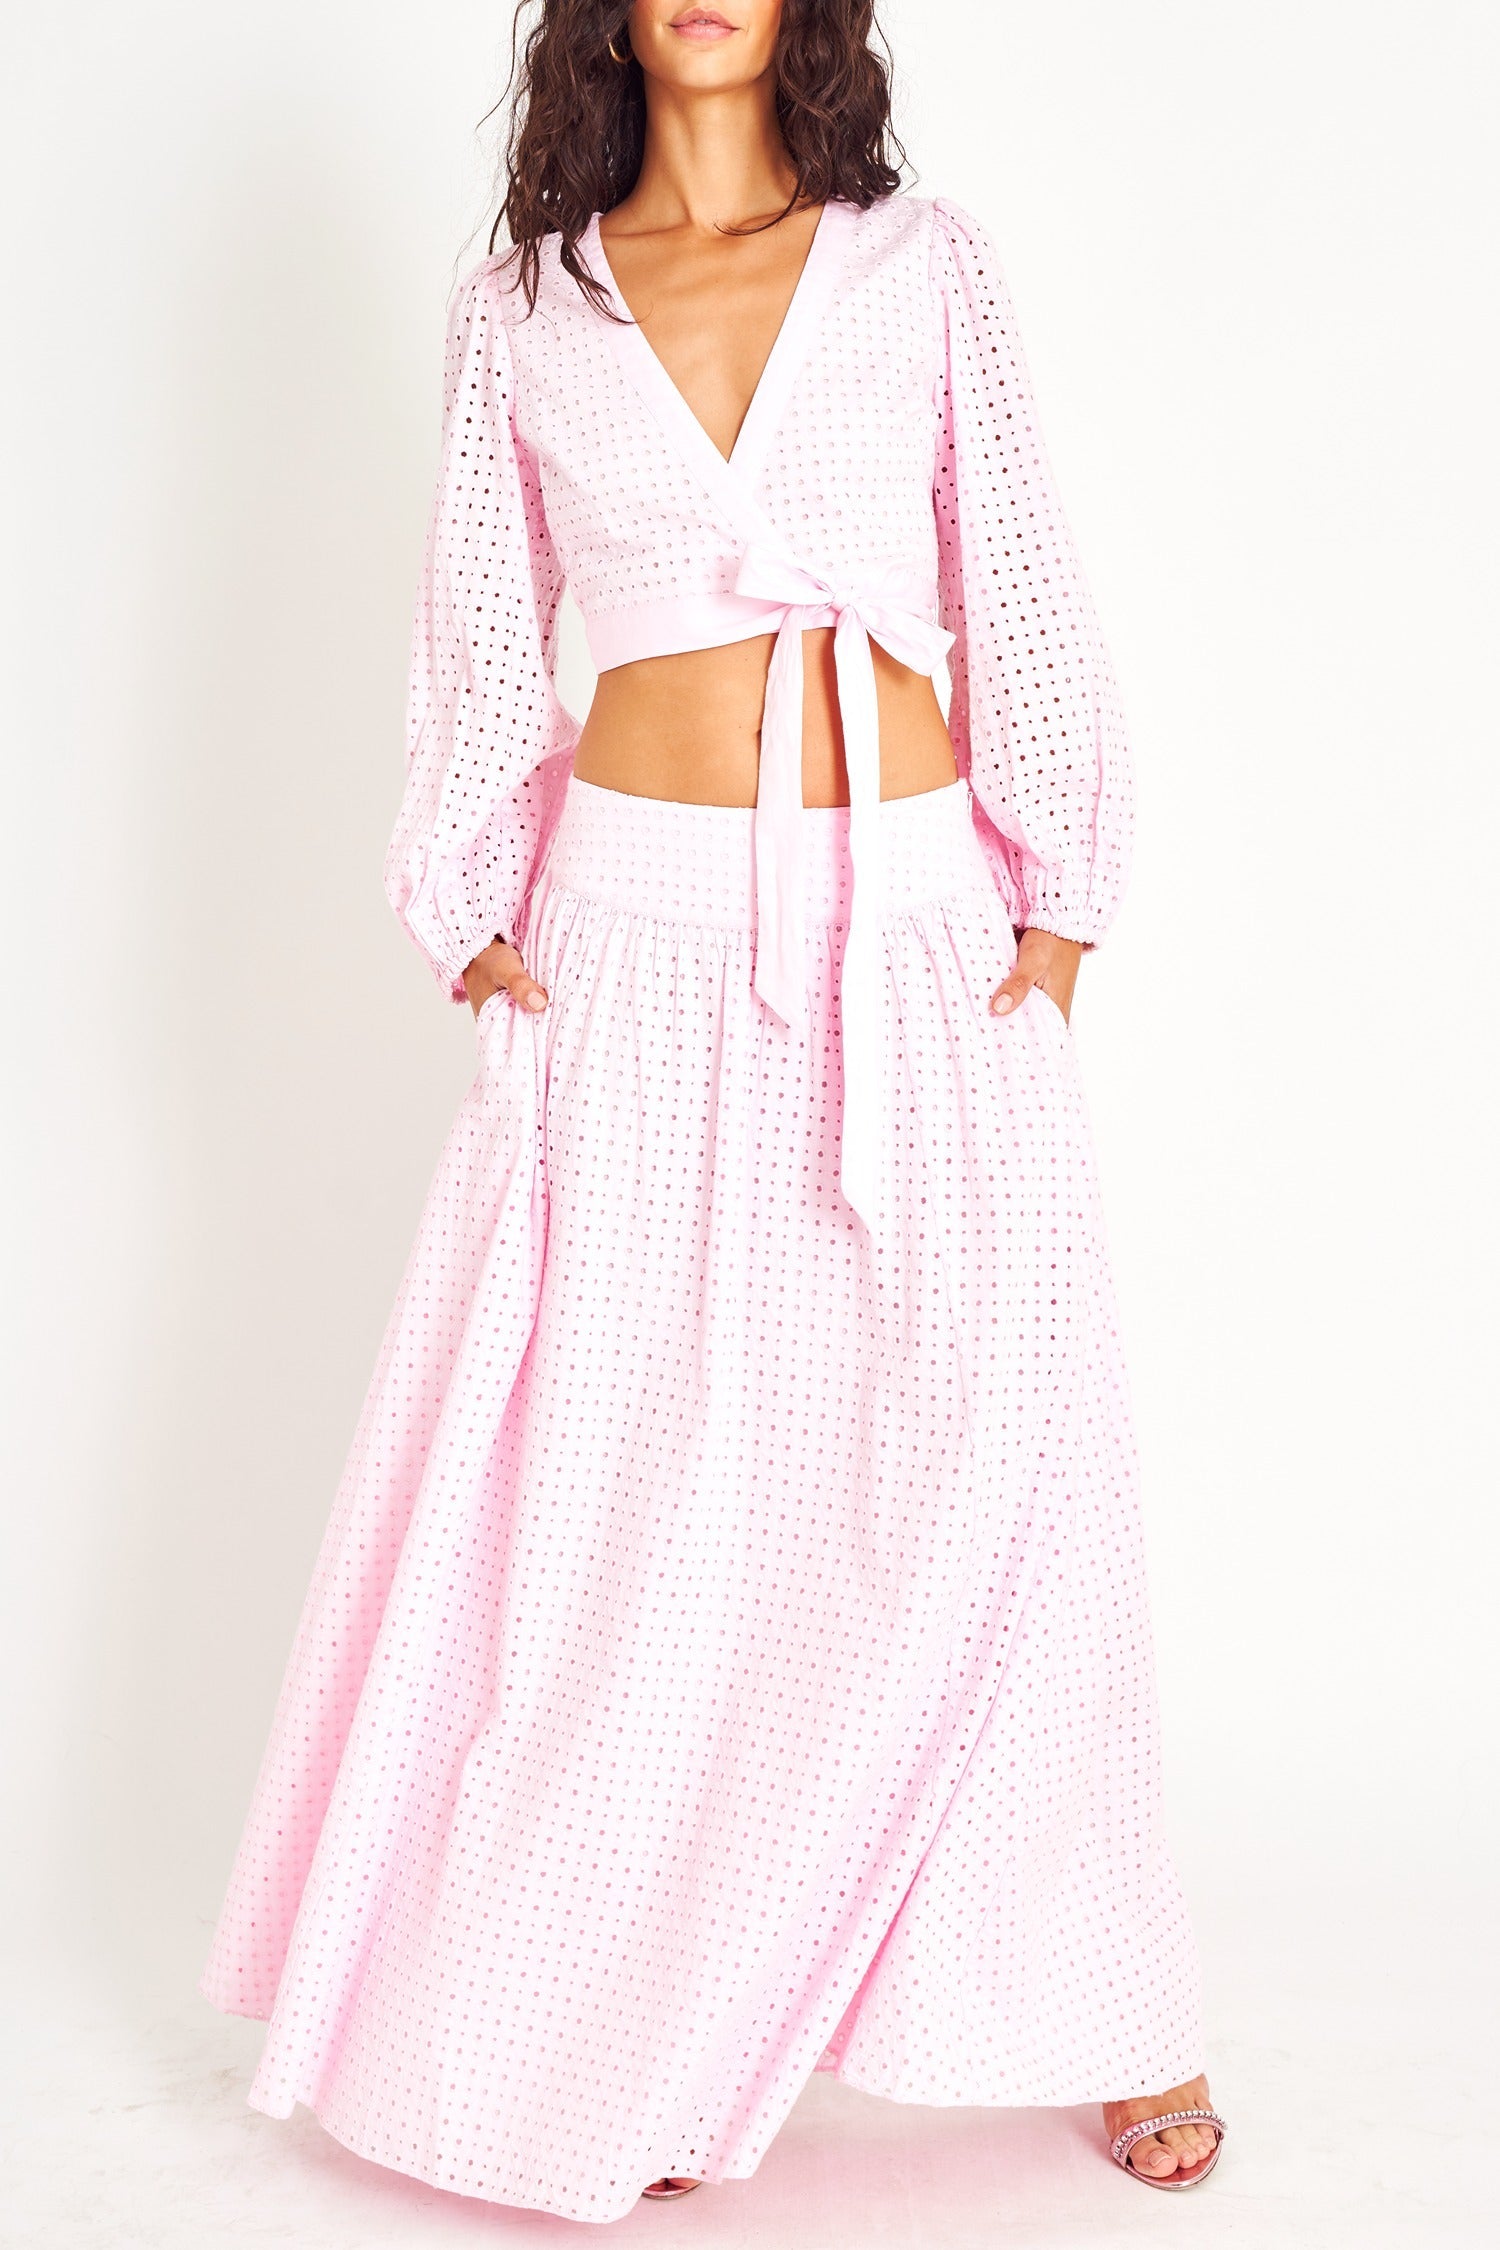 Pink maxi skirt featuring embroidery and floral appliques